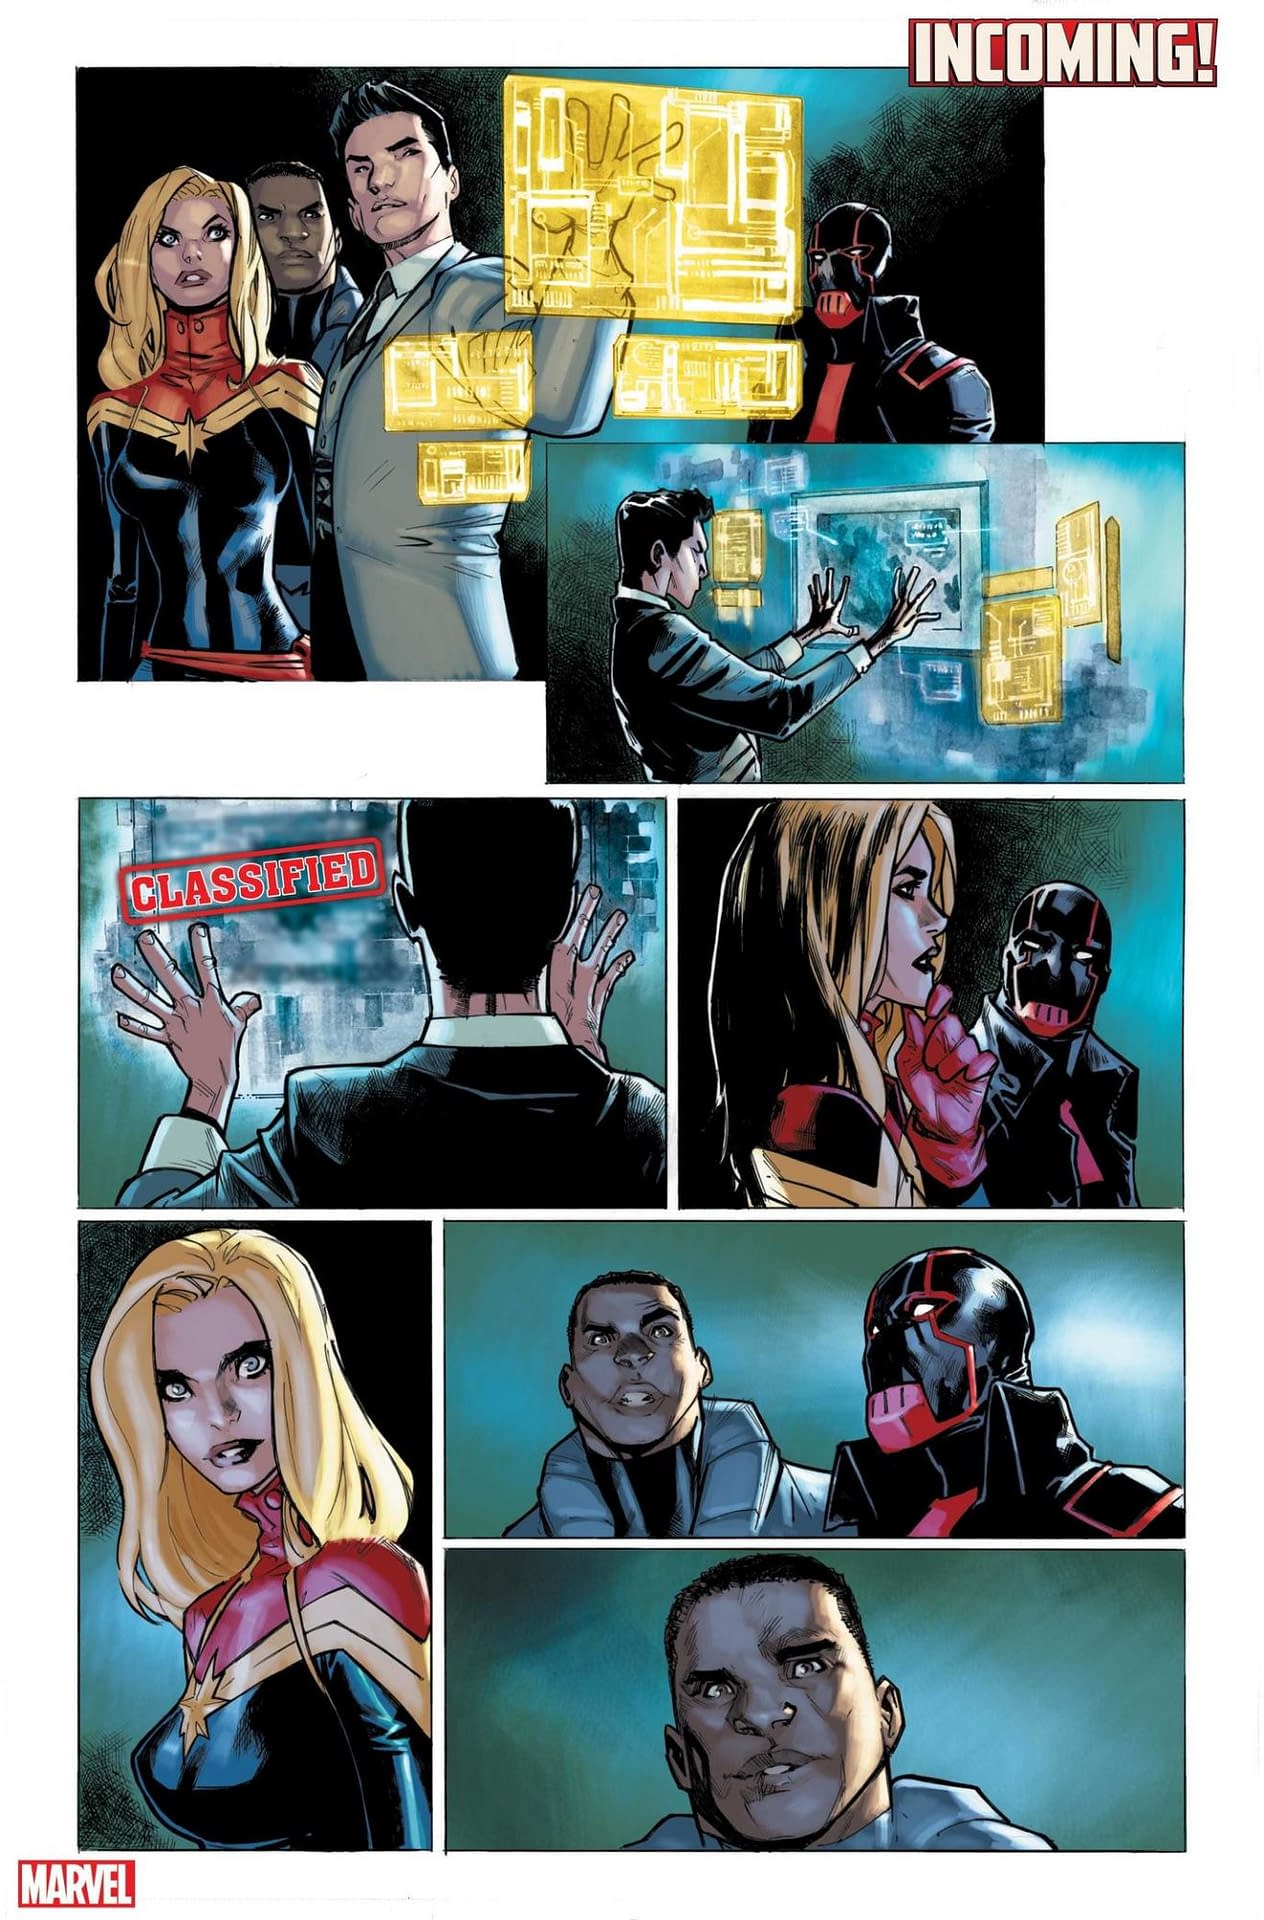 5 Pages From Marvel's Next Event Comic, Incoming